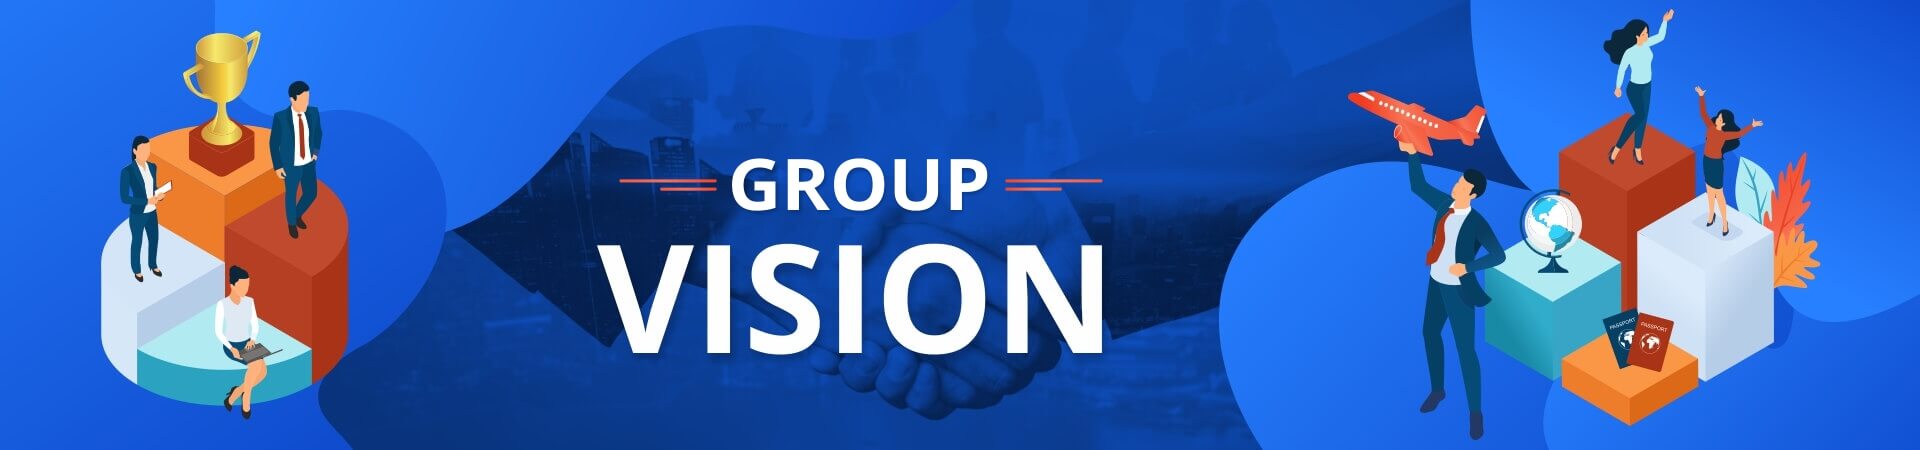 Group Vision | Pyramid eServices